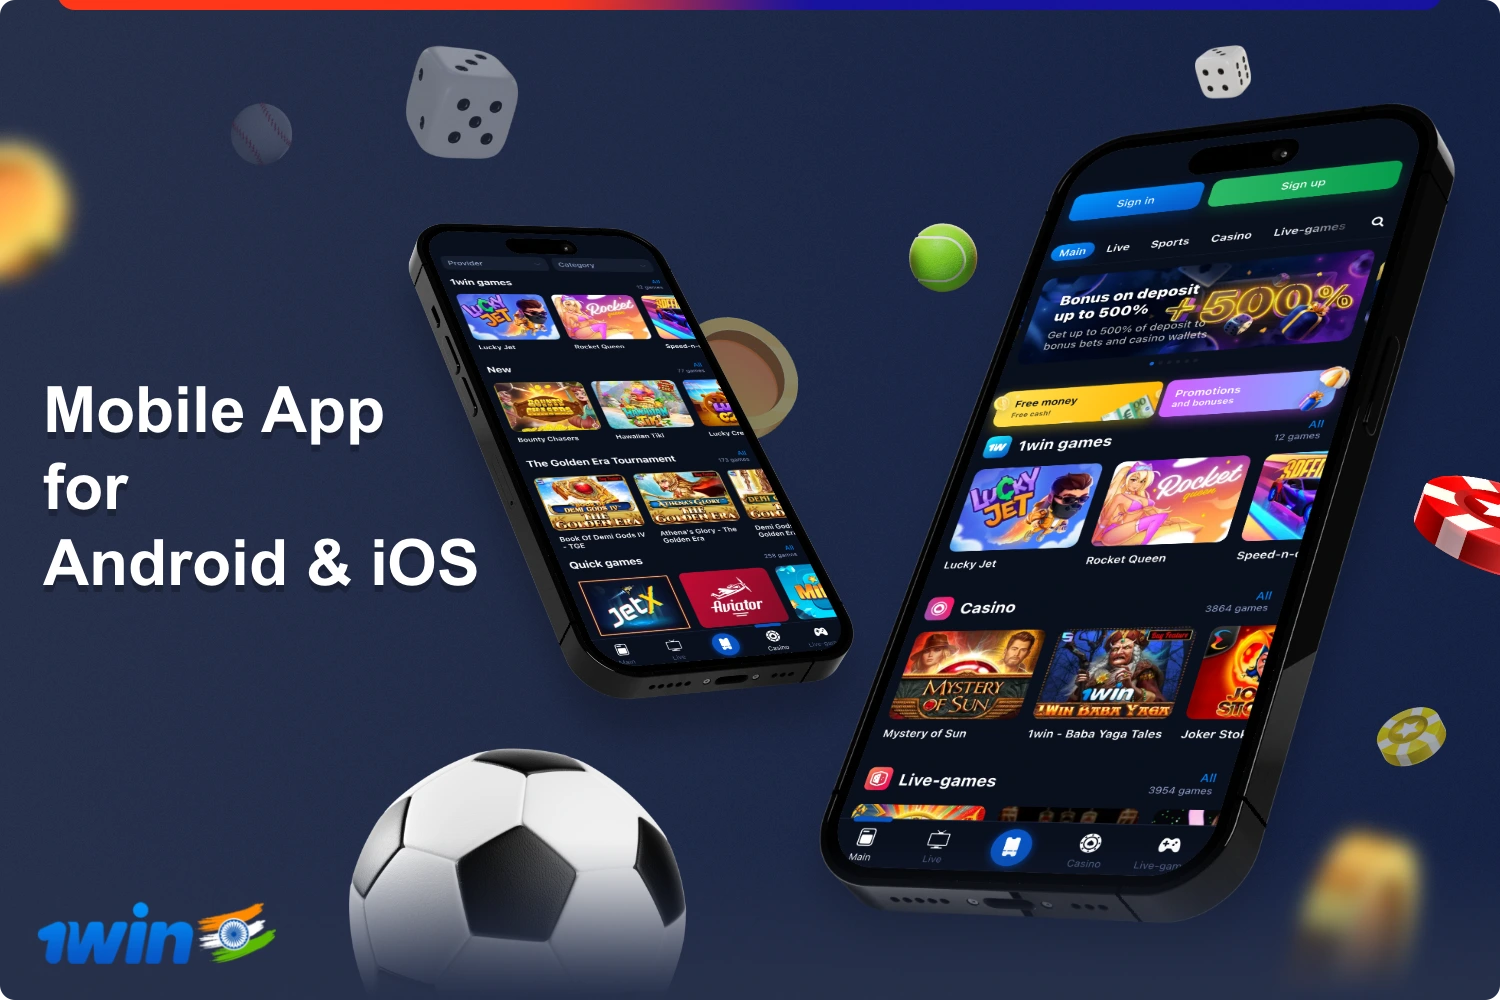 Download 1win mobile app for Android and iOS is absolutely free from the official website